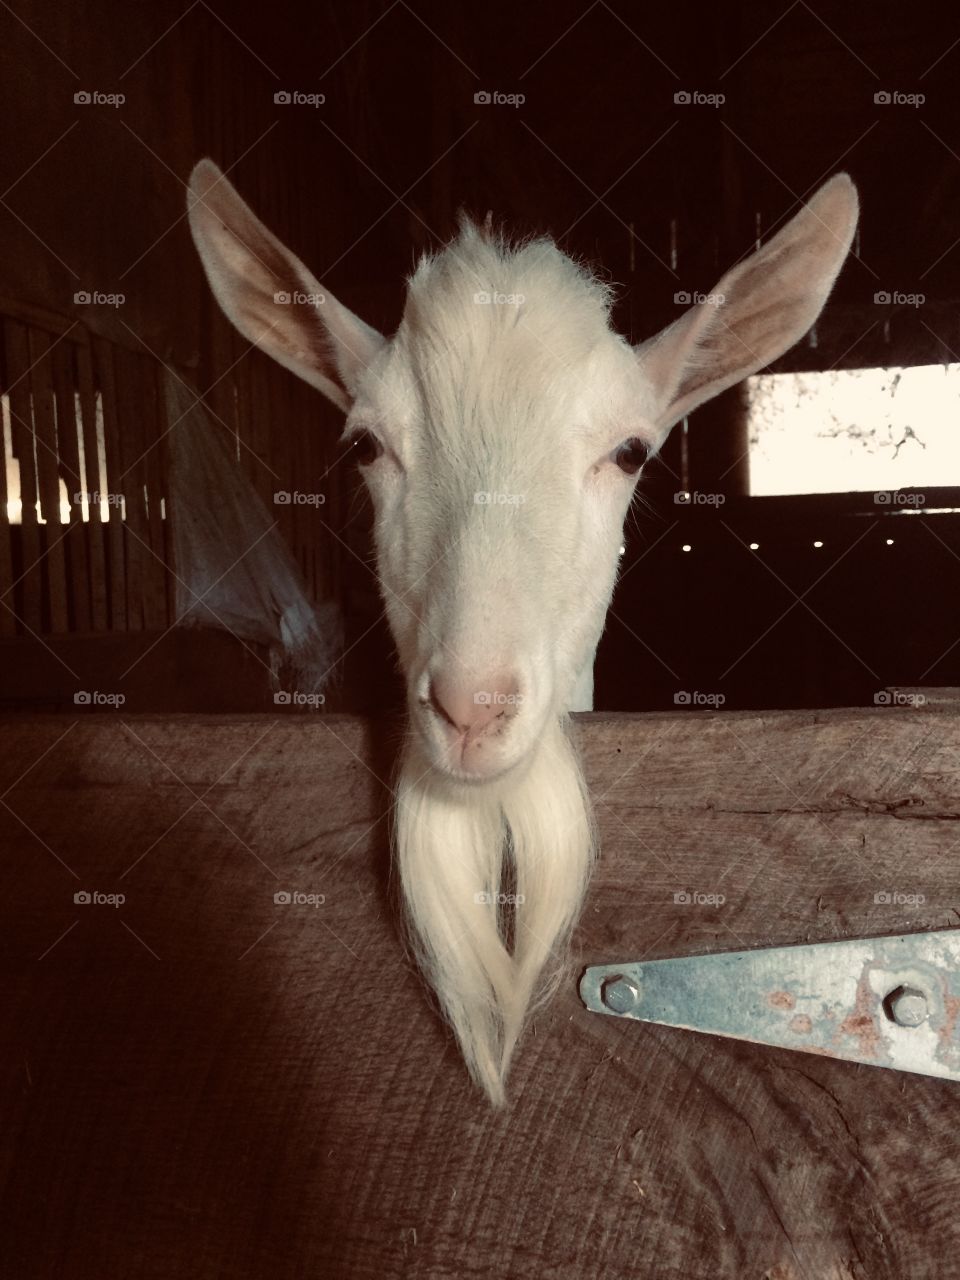 A white goat’s head peeking out over a barn door